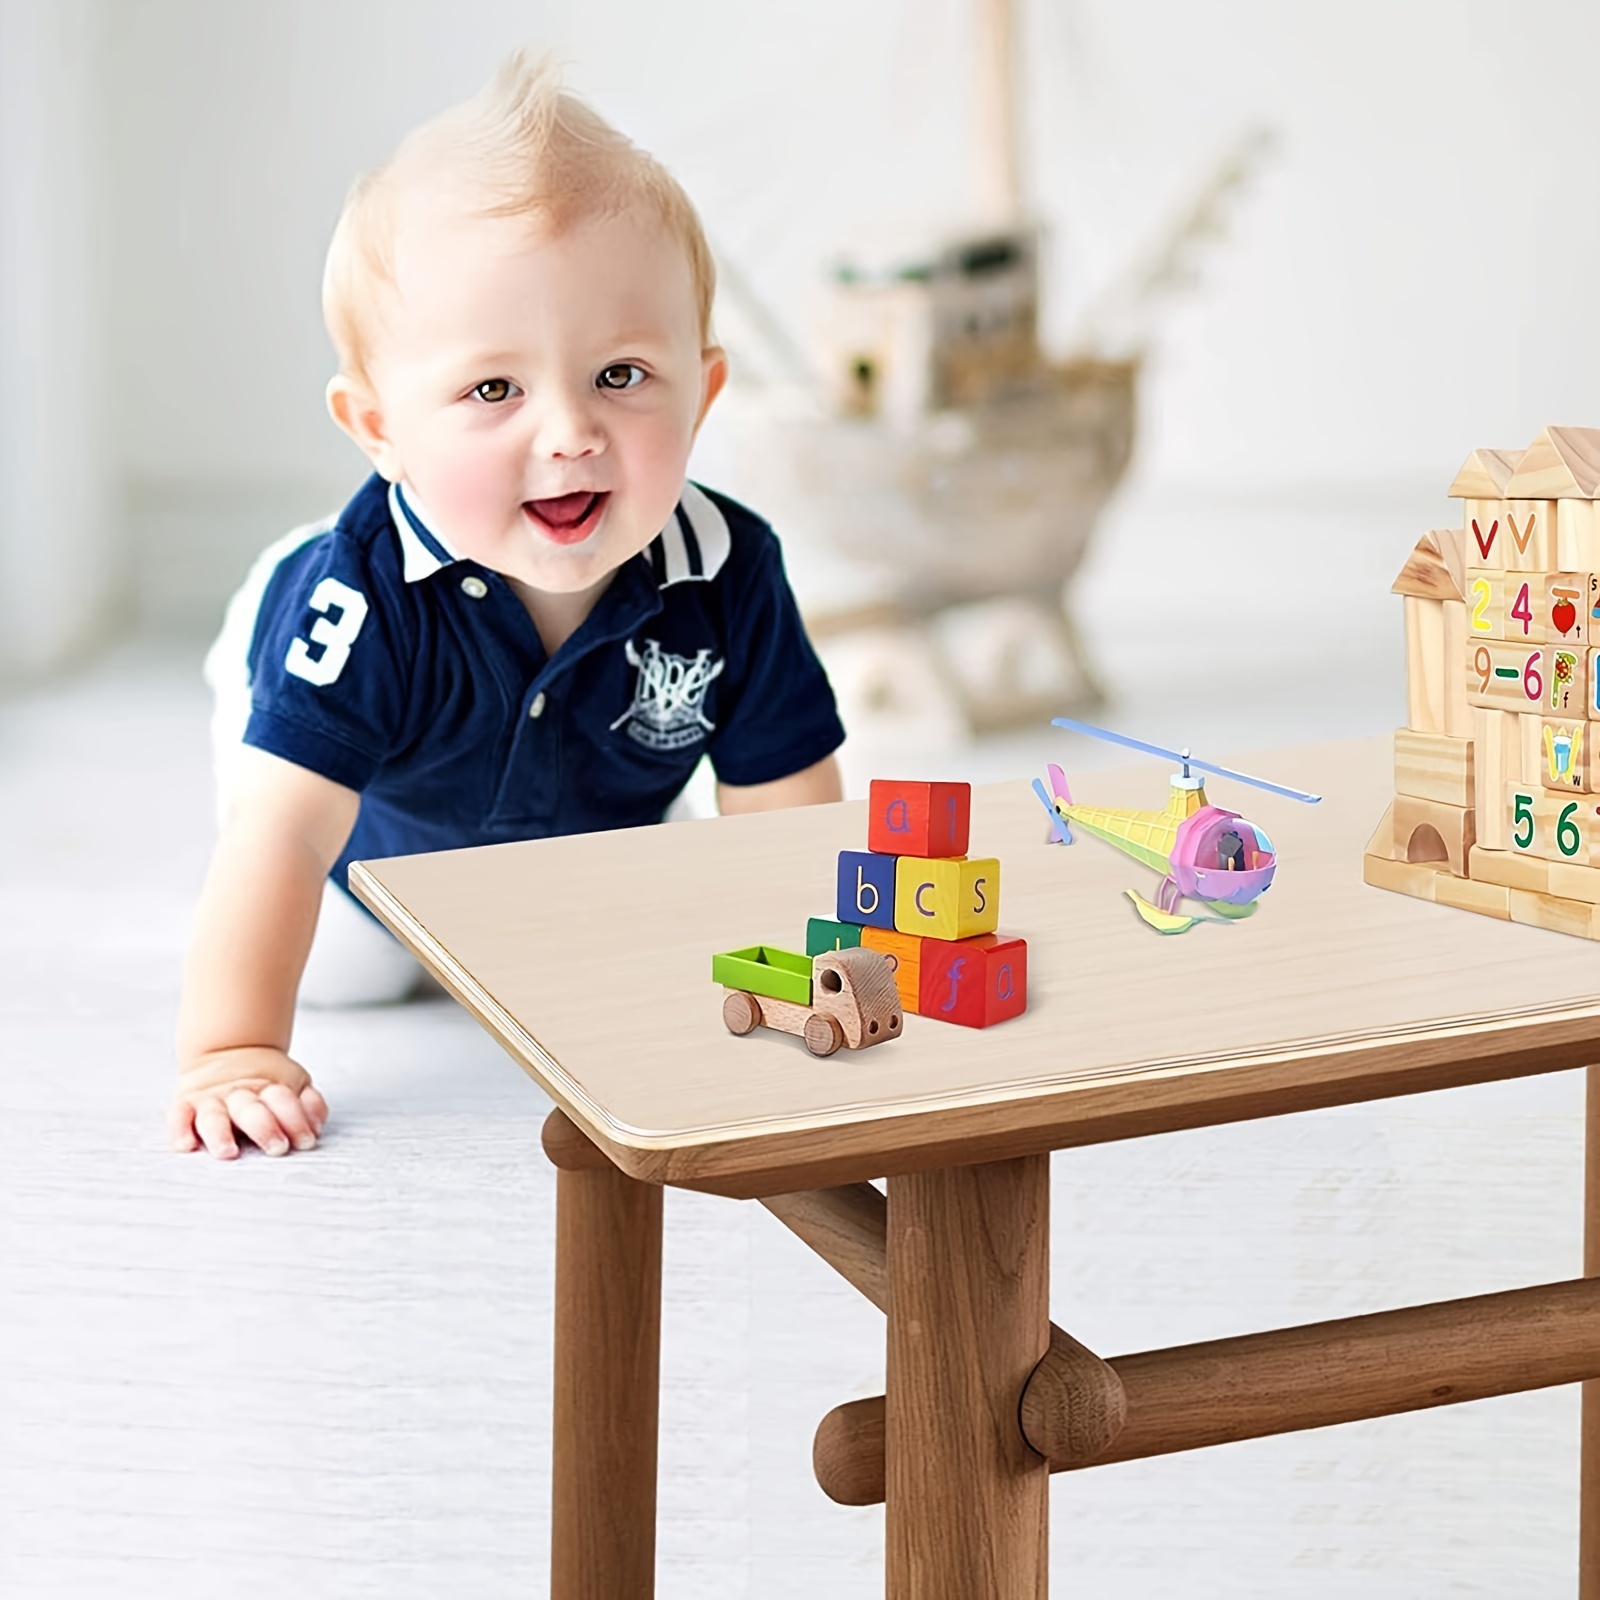 Table Sharp Edge Corner Protector For Baby/Child Safety